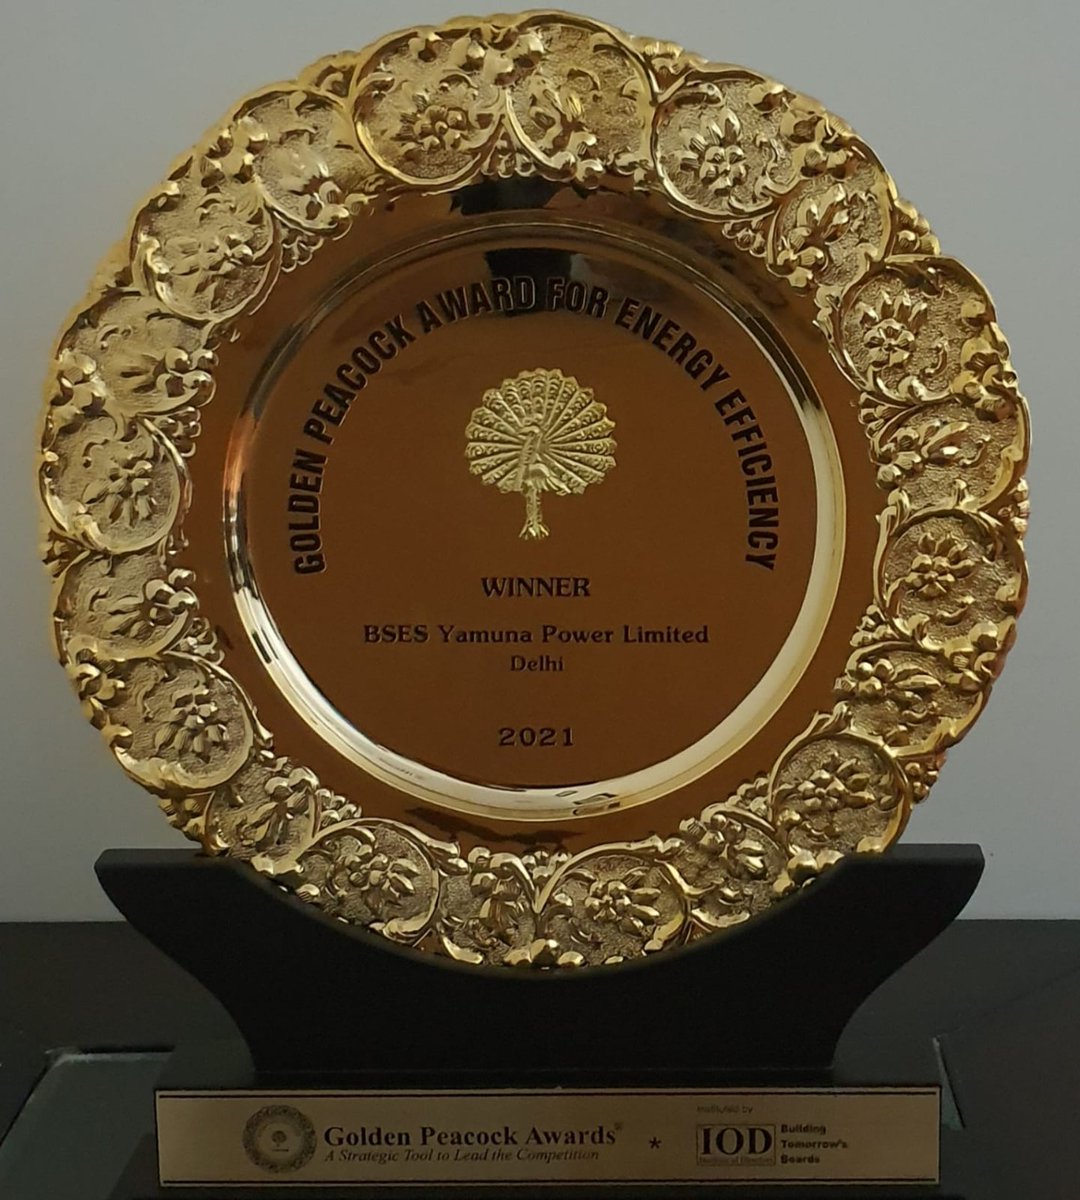 BSES Yamuna Power Limited has been awarded the coveted Golden Peacock Award 2020 for ‘Energy Efficiency’. Instituted by the Institute of Directors, these awards are considered as the gold standard in corporate excellence https://t.co/97DQ7uLqdq